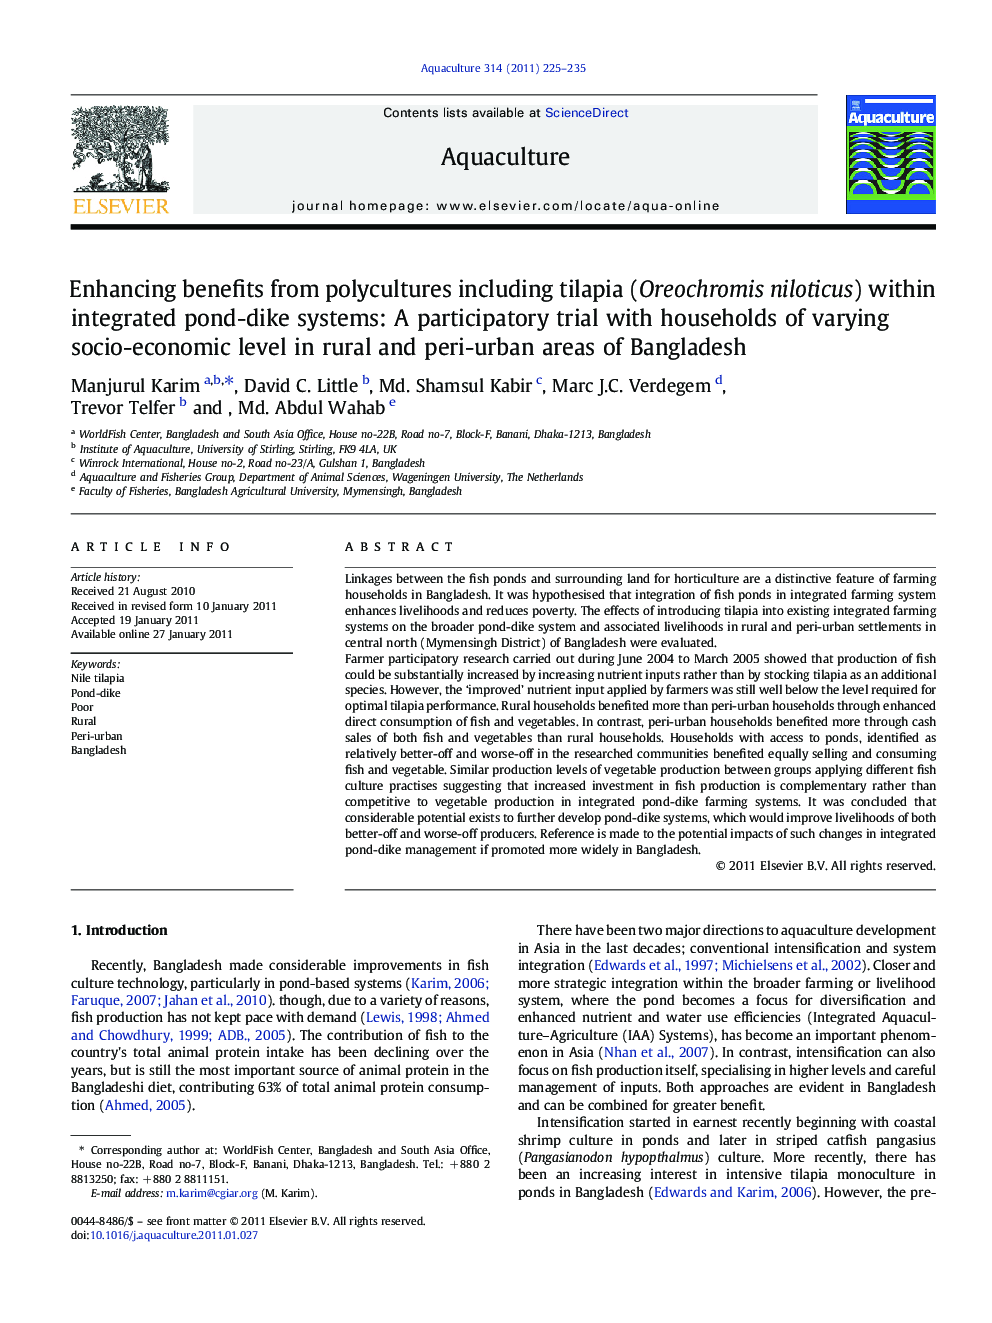 Enhancing benefits from polycultures including tilapia (Oreochromis niloticus) within integrated pond-dike systems: A participatory trial with households of varying socio-economic level in rural and peri-urban areas of Bangladesh